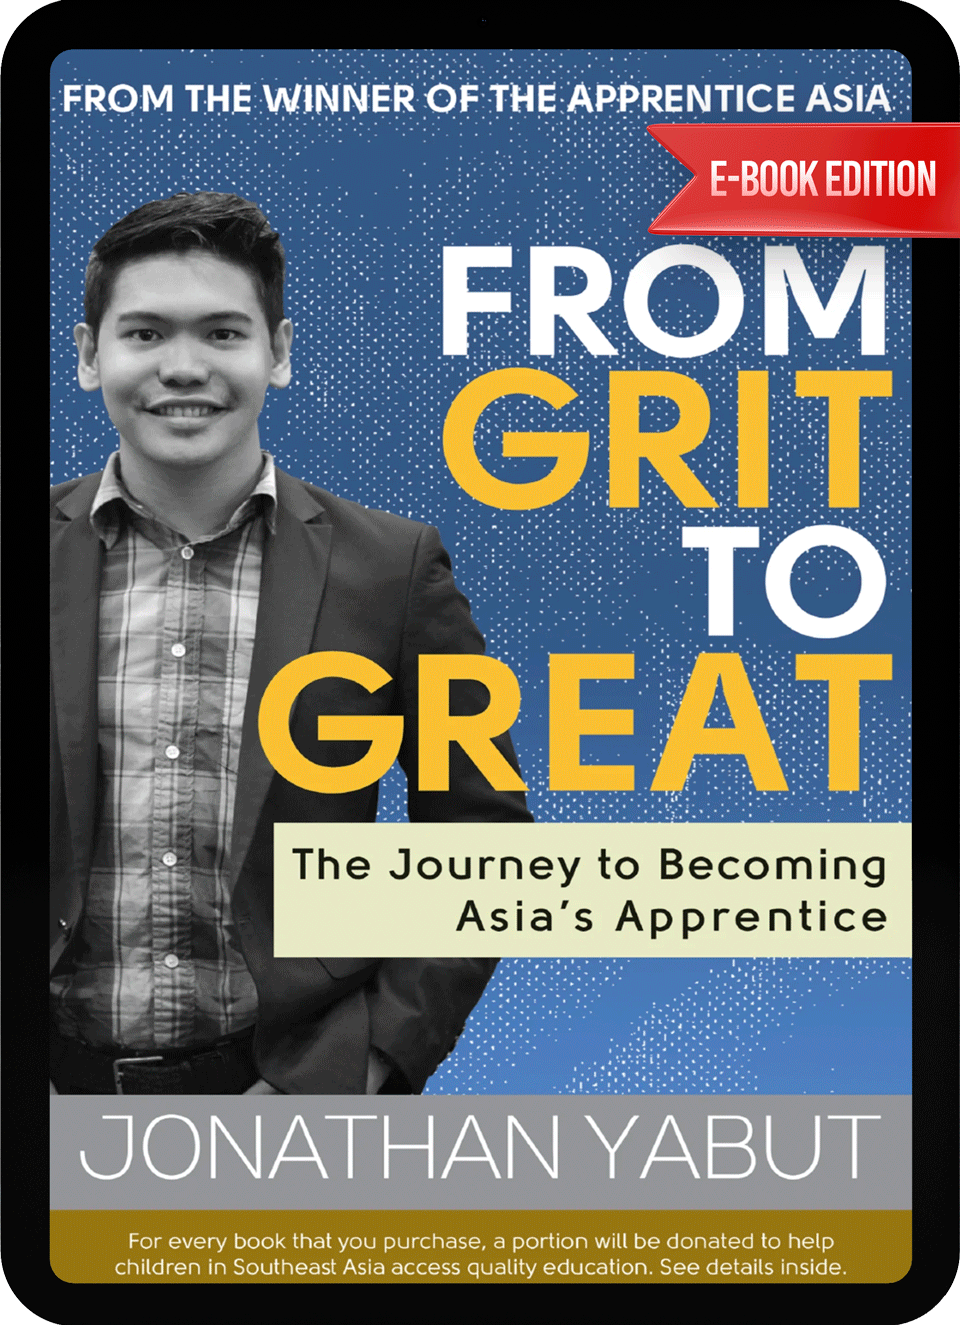 eBook - From Grit To Great: The Journey to Becoming Asia's Apprentice